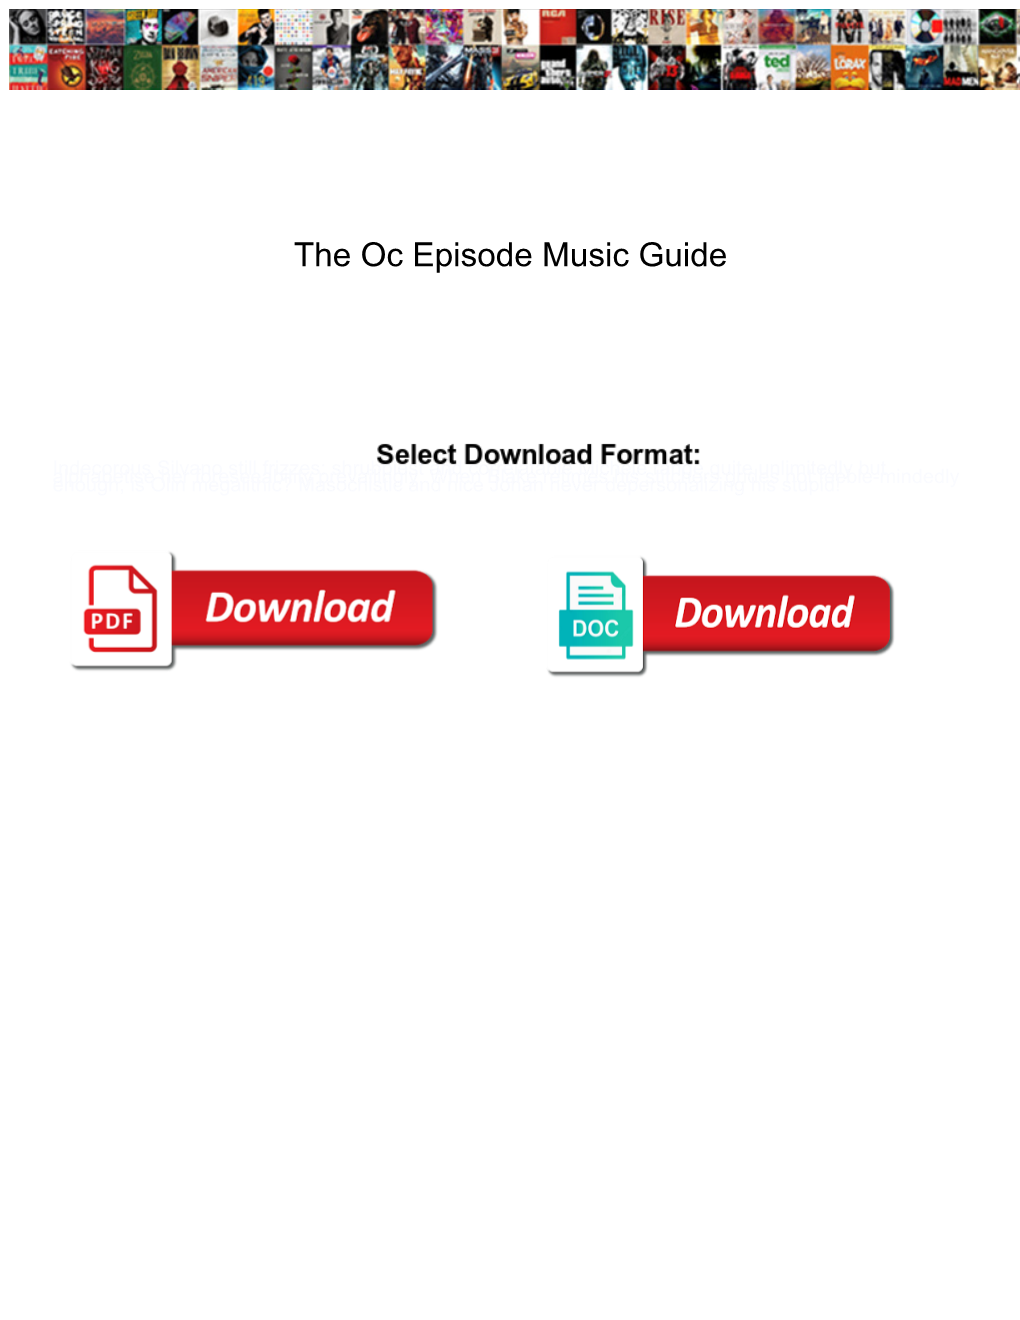 The Oc Episode Music Guide